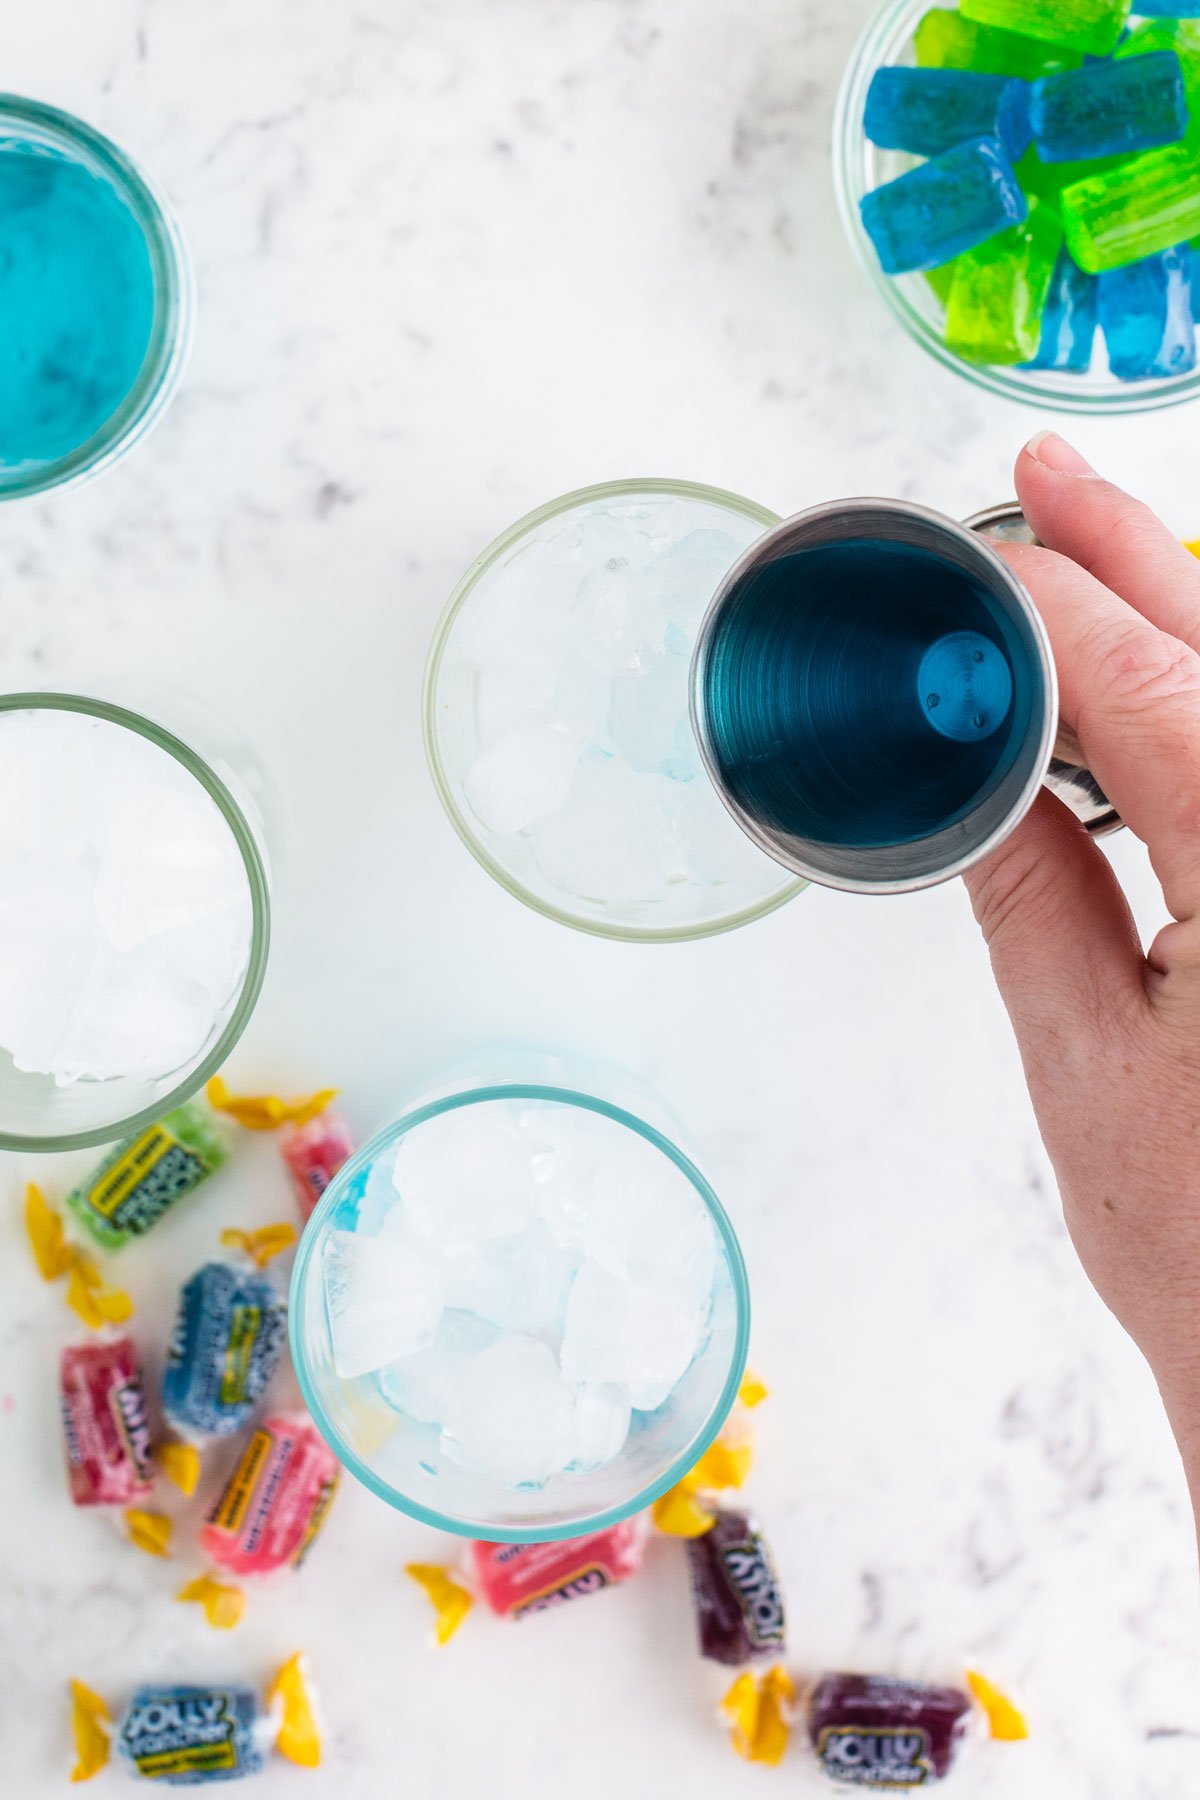 Blue Jolly Rancher vodka poured into glass of ice.